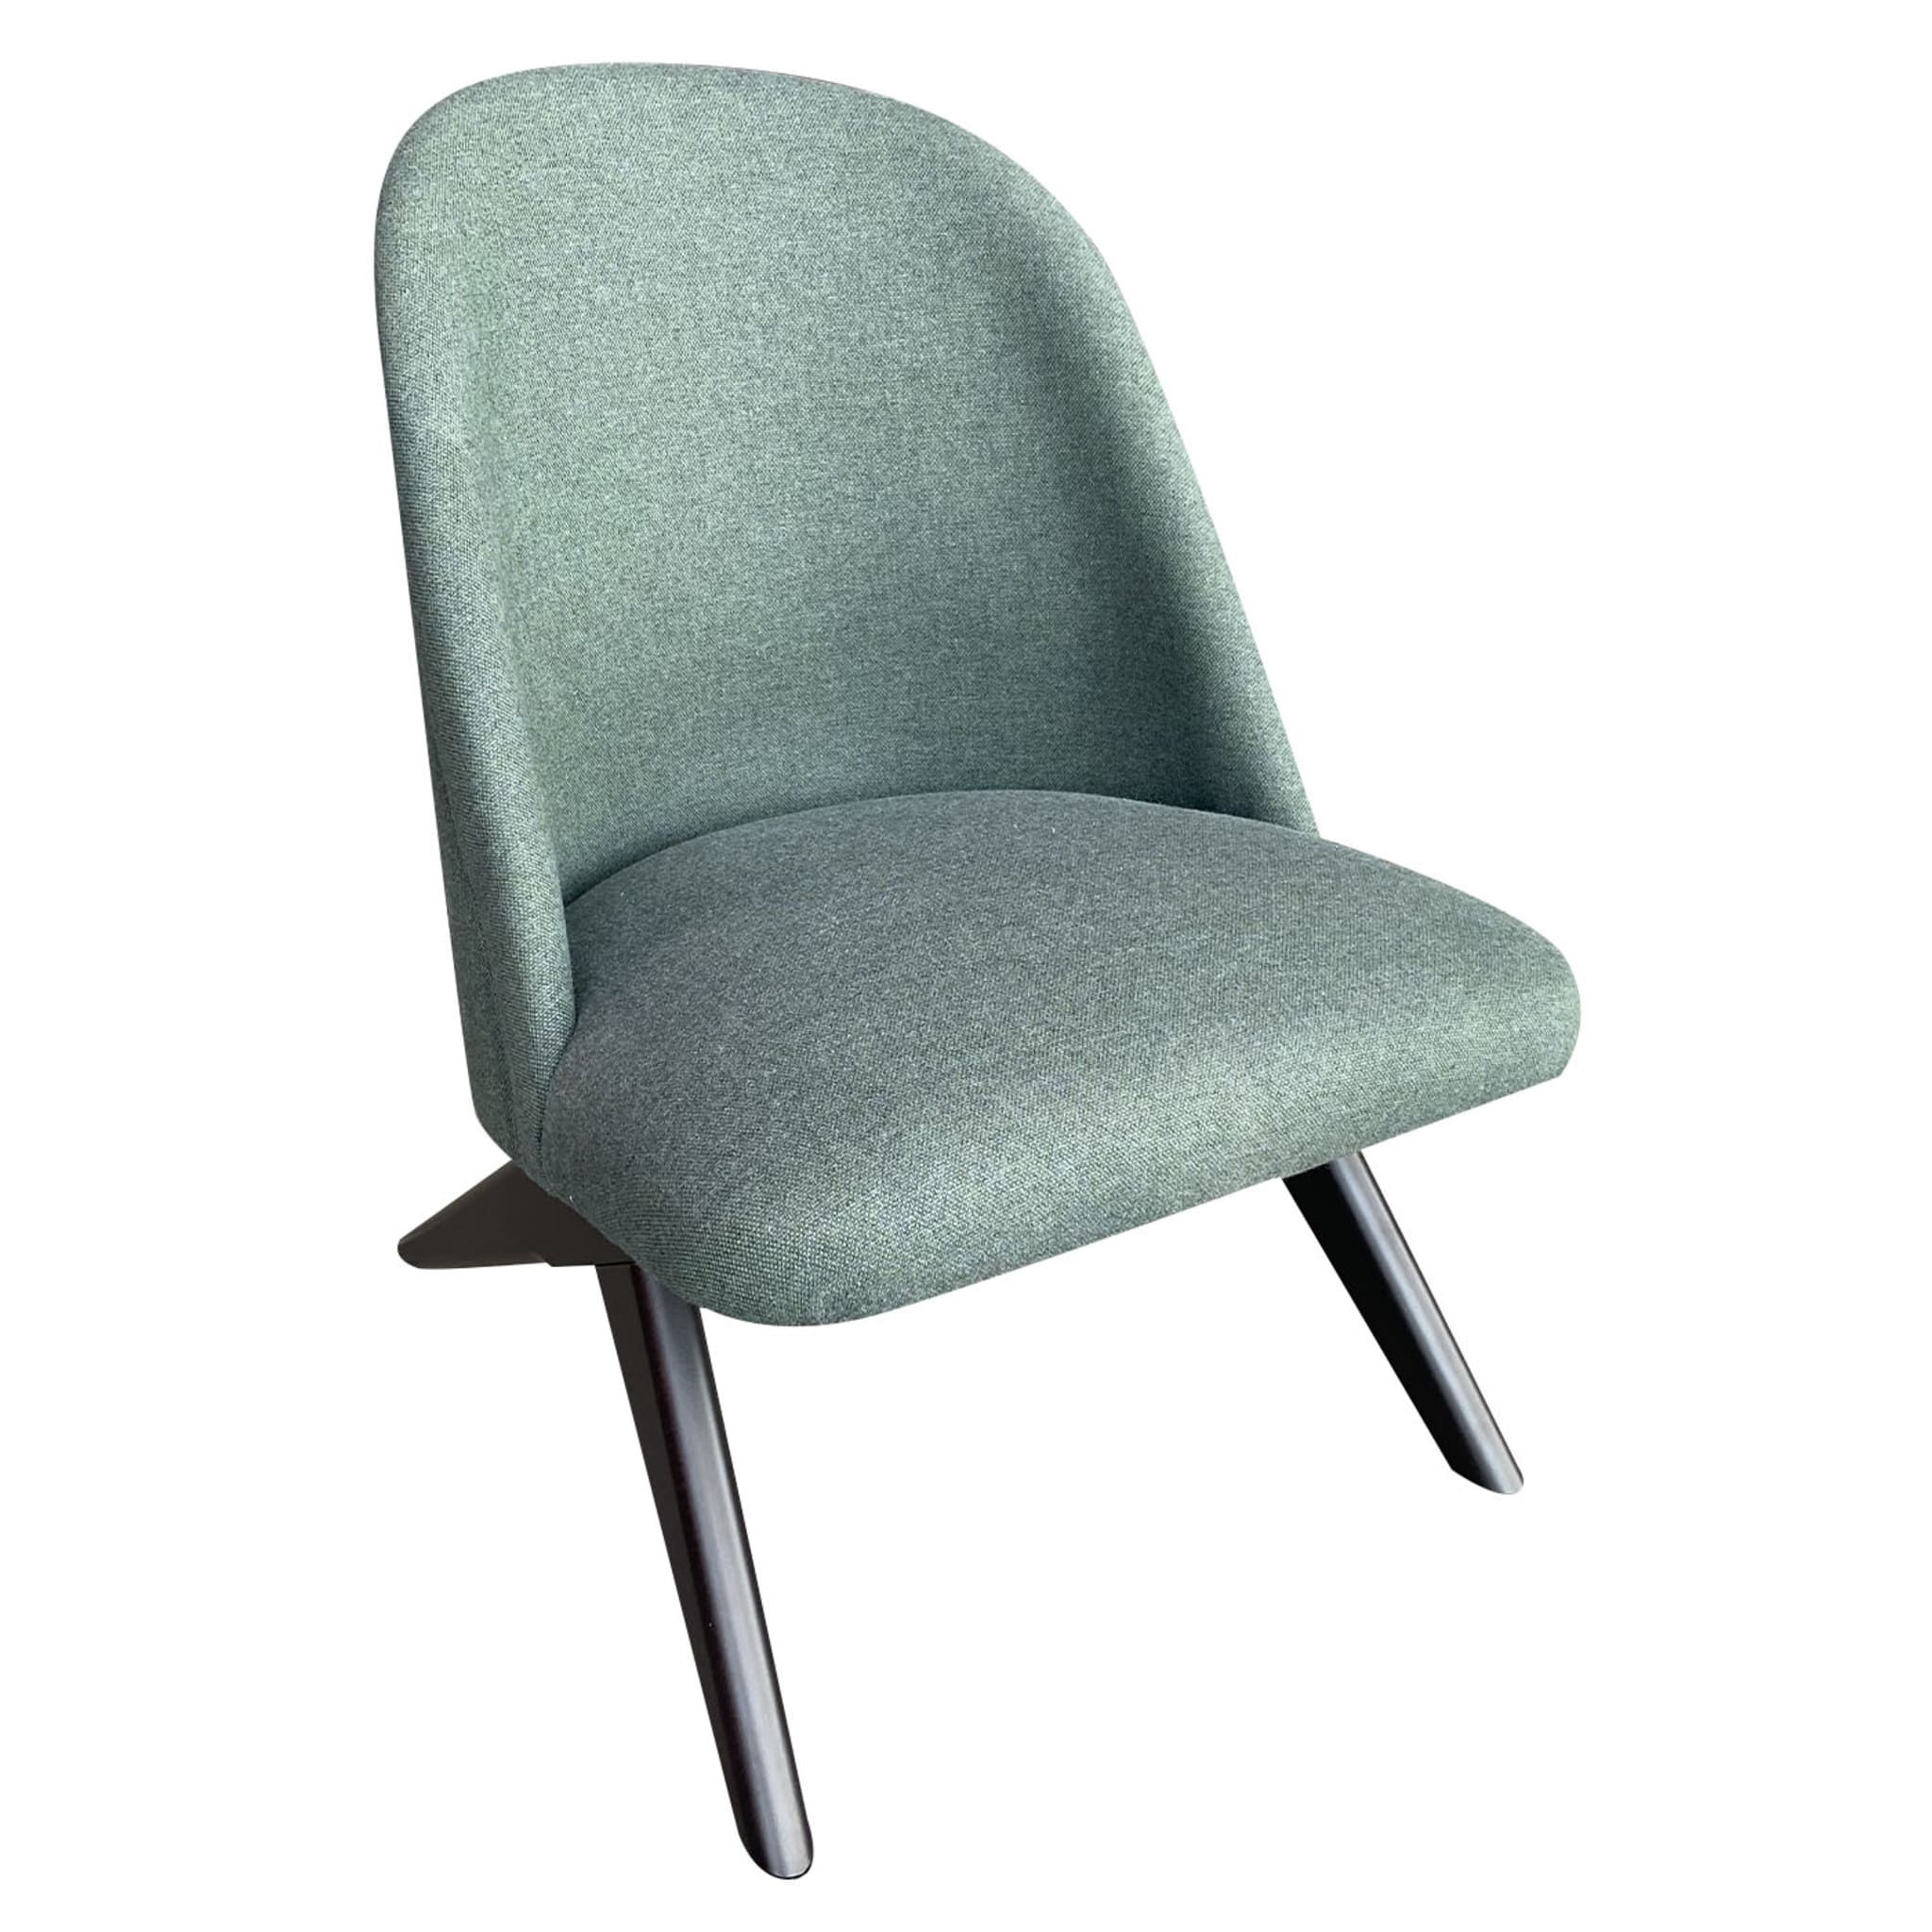 Macao Greenford Lounge Chair - Alternative view 1